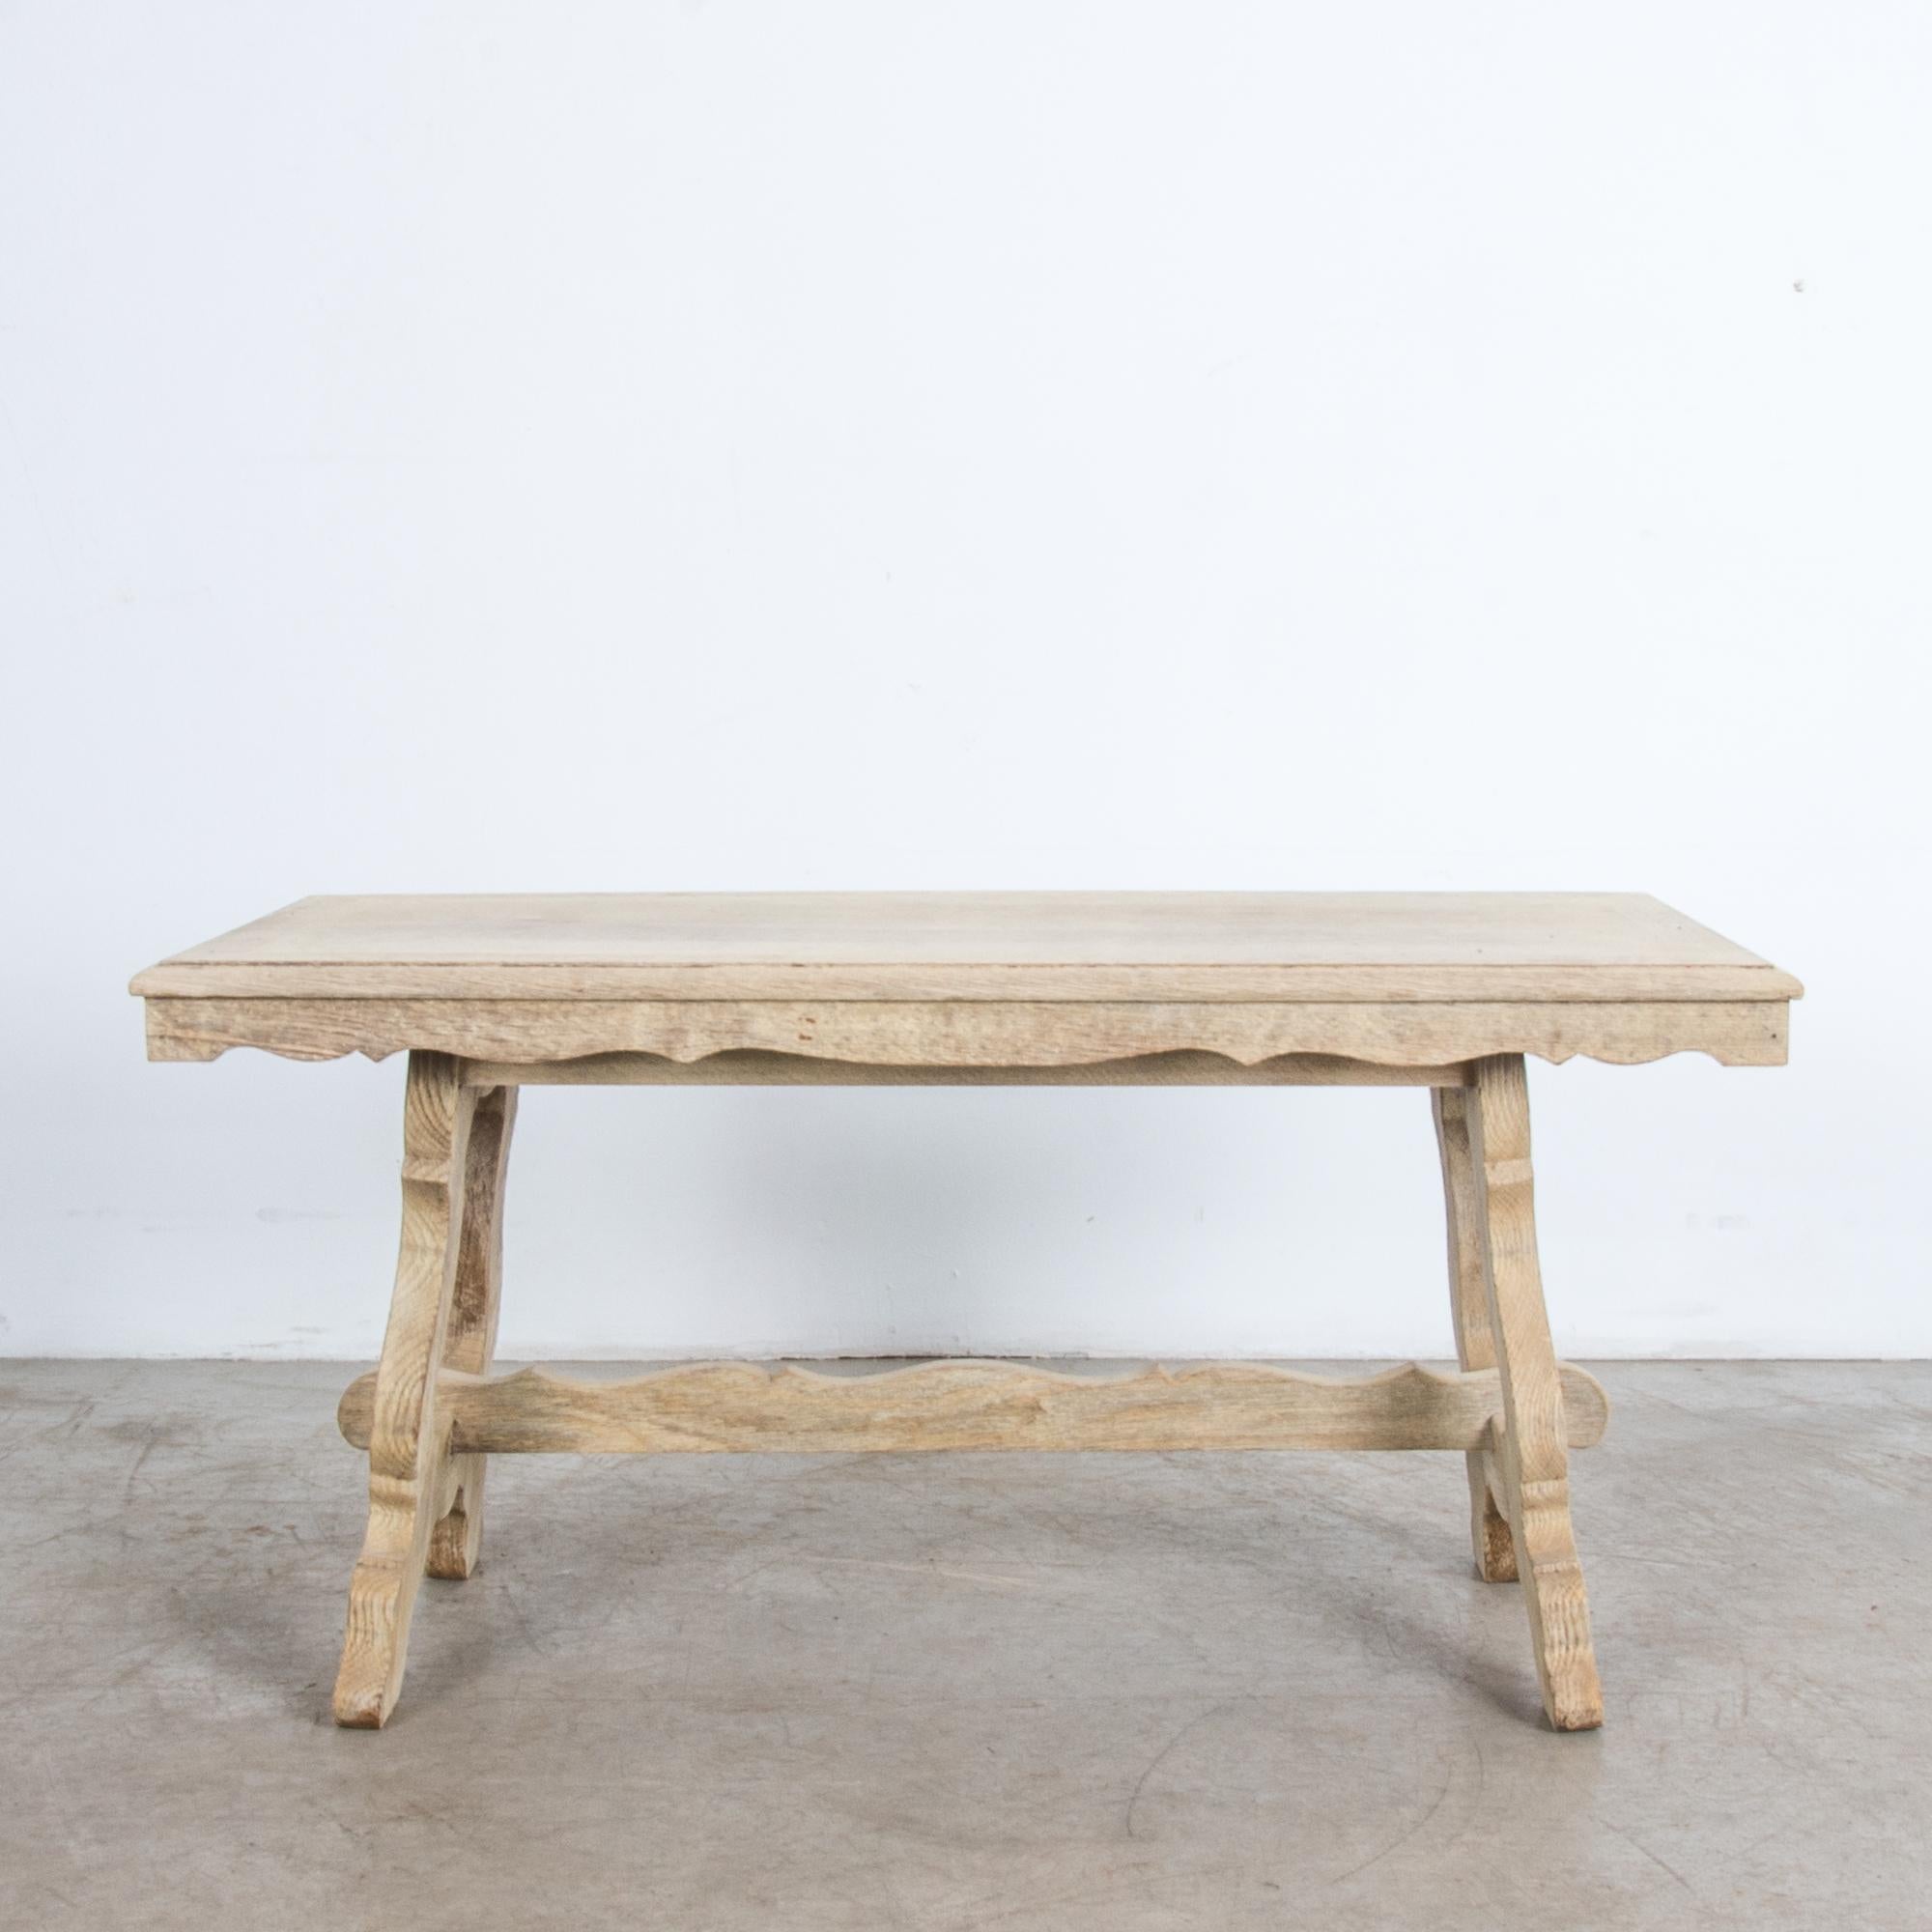 A typical mid-20th century Belgian style re-imagines traditional shapes in thick slabs of oak. Rustic simplified, with an elegant note of classical style. Thick legs support the tabletop from either side, supported by a trestle post. With clear oil